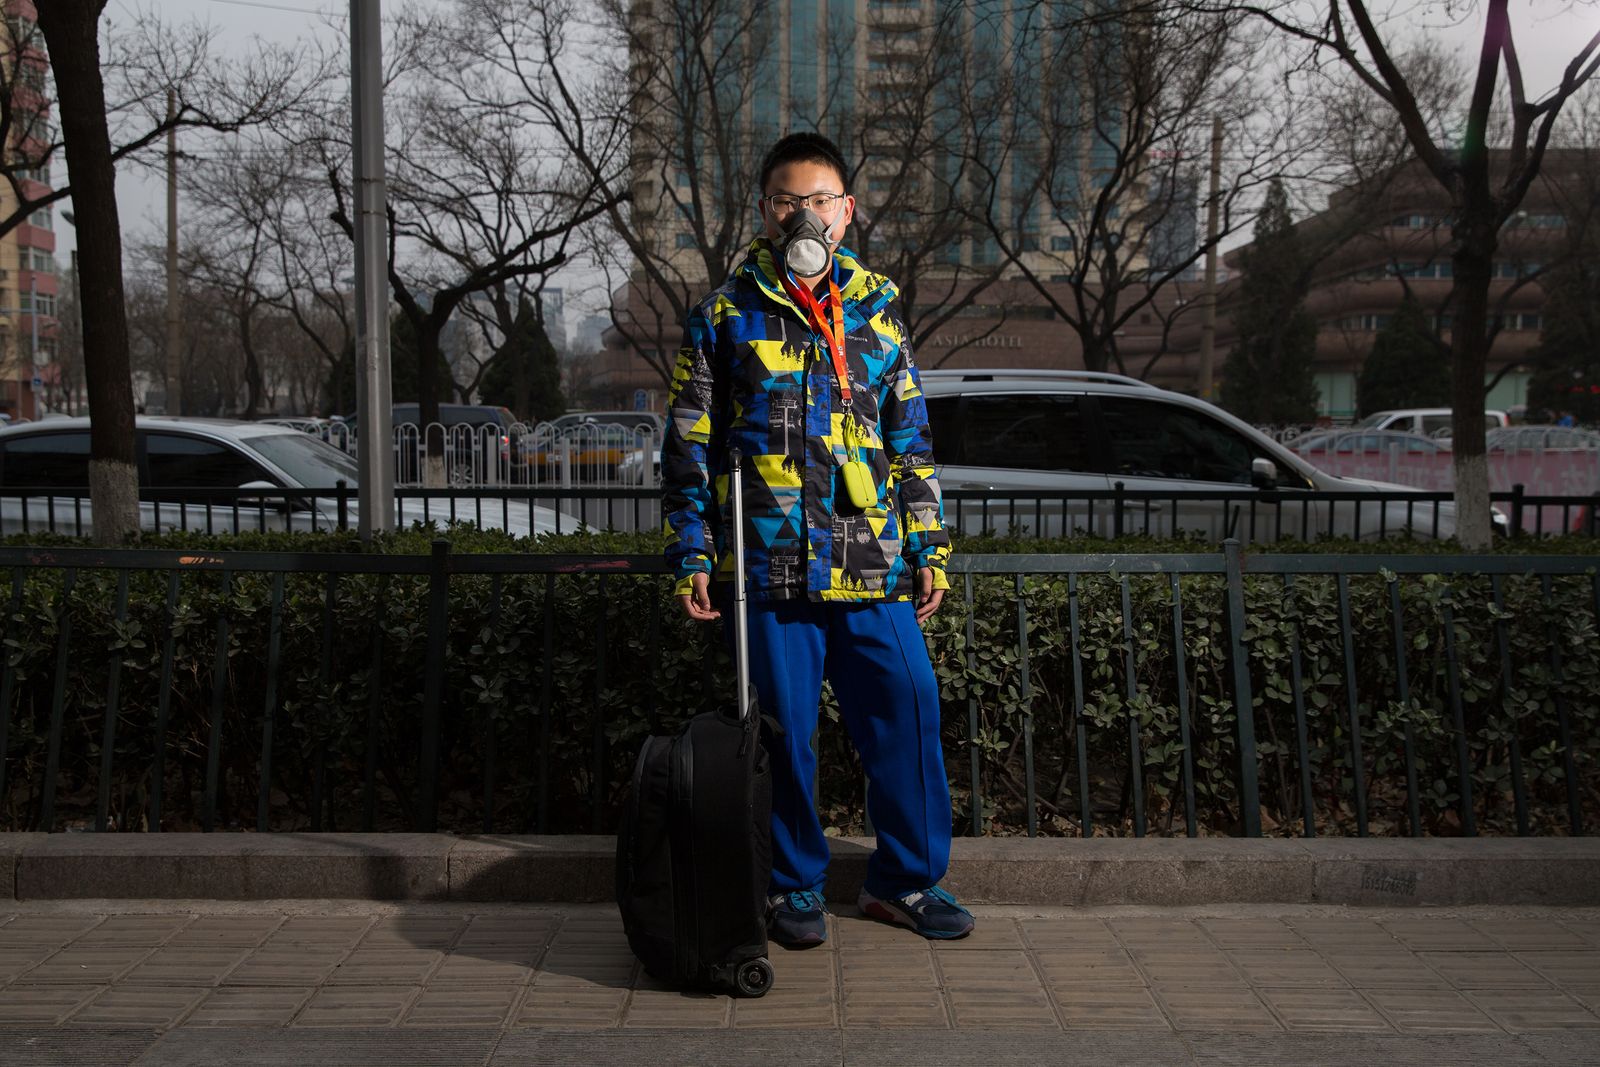 © Sean Gallagher - Image from the Beijing – The Masked City photography project